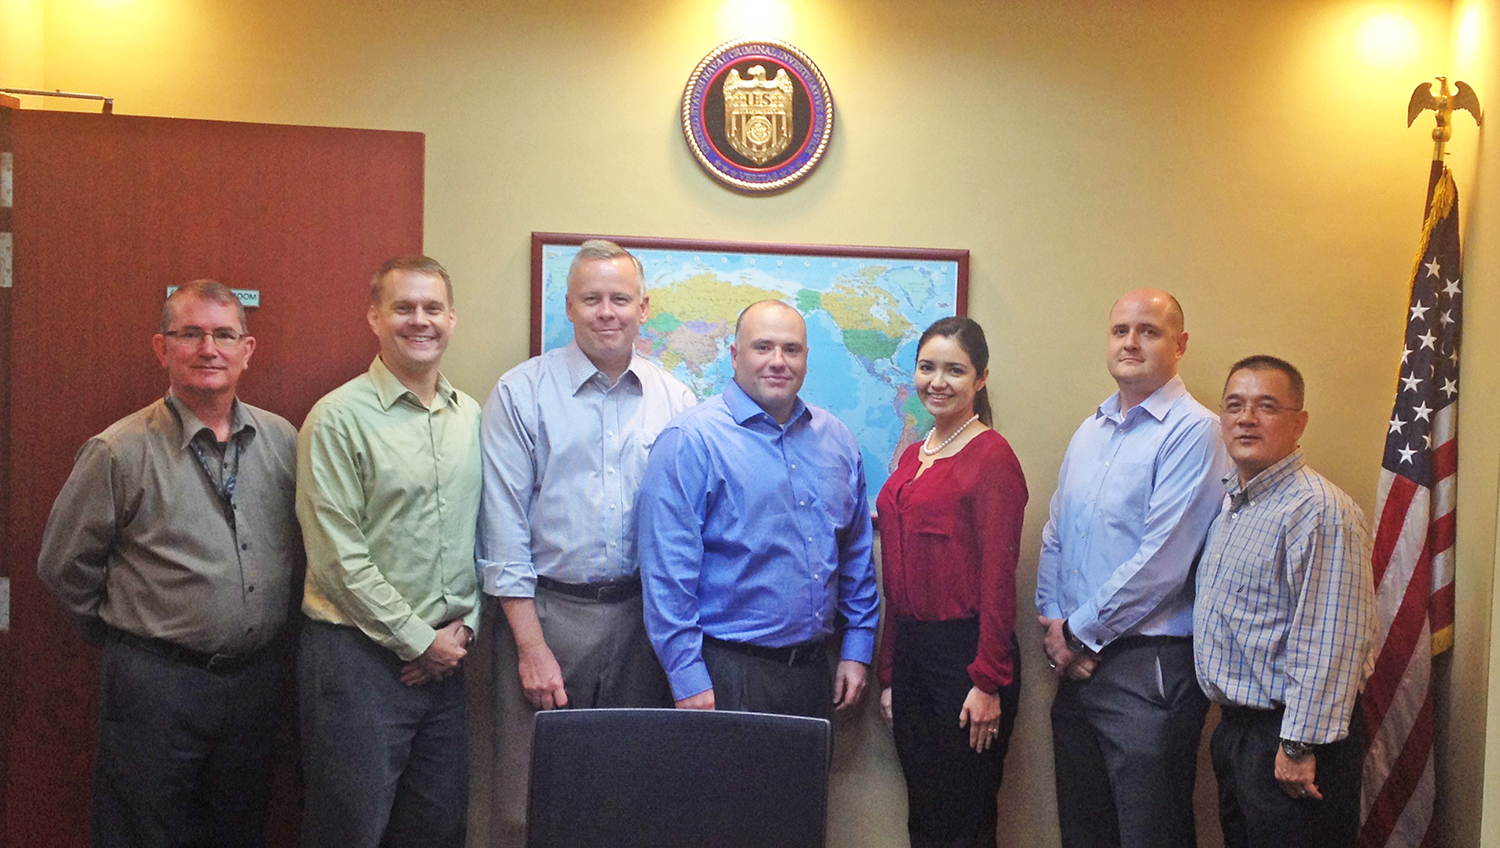 Me and part of my leadership team from my tour as the Special Agent in Charge of the NCIS Southeast Asia Field Office, based in Singapore.